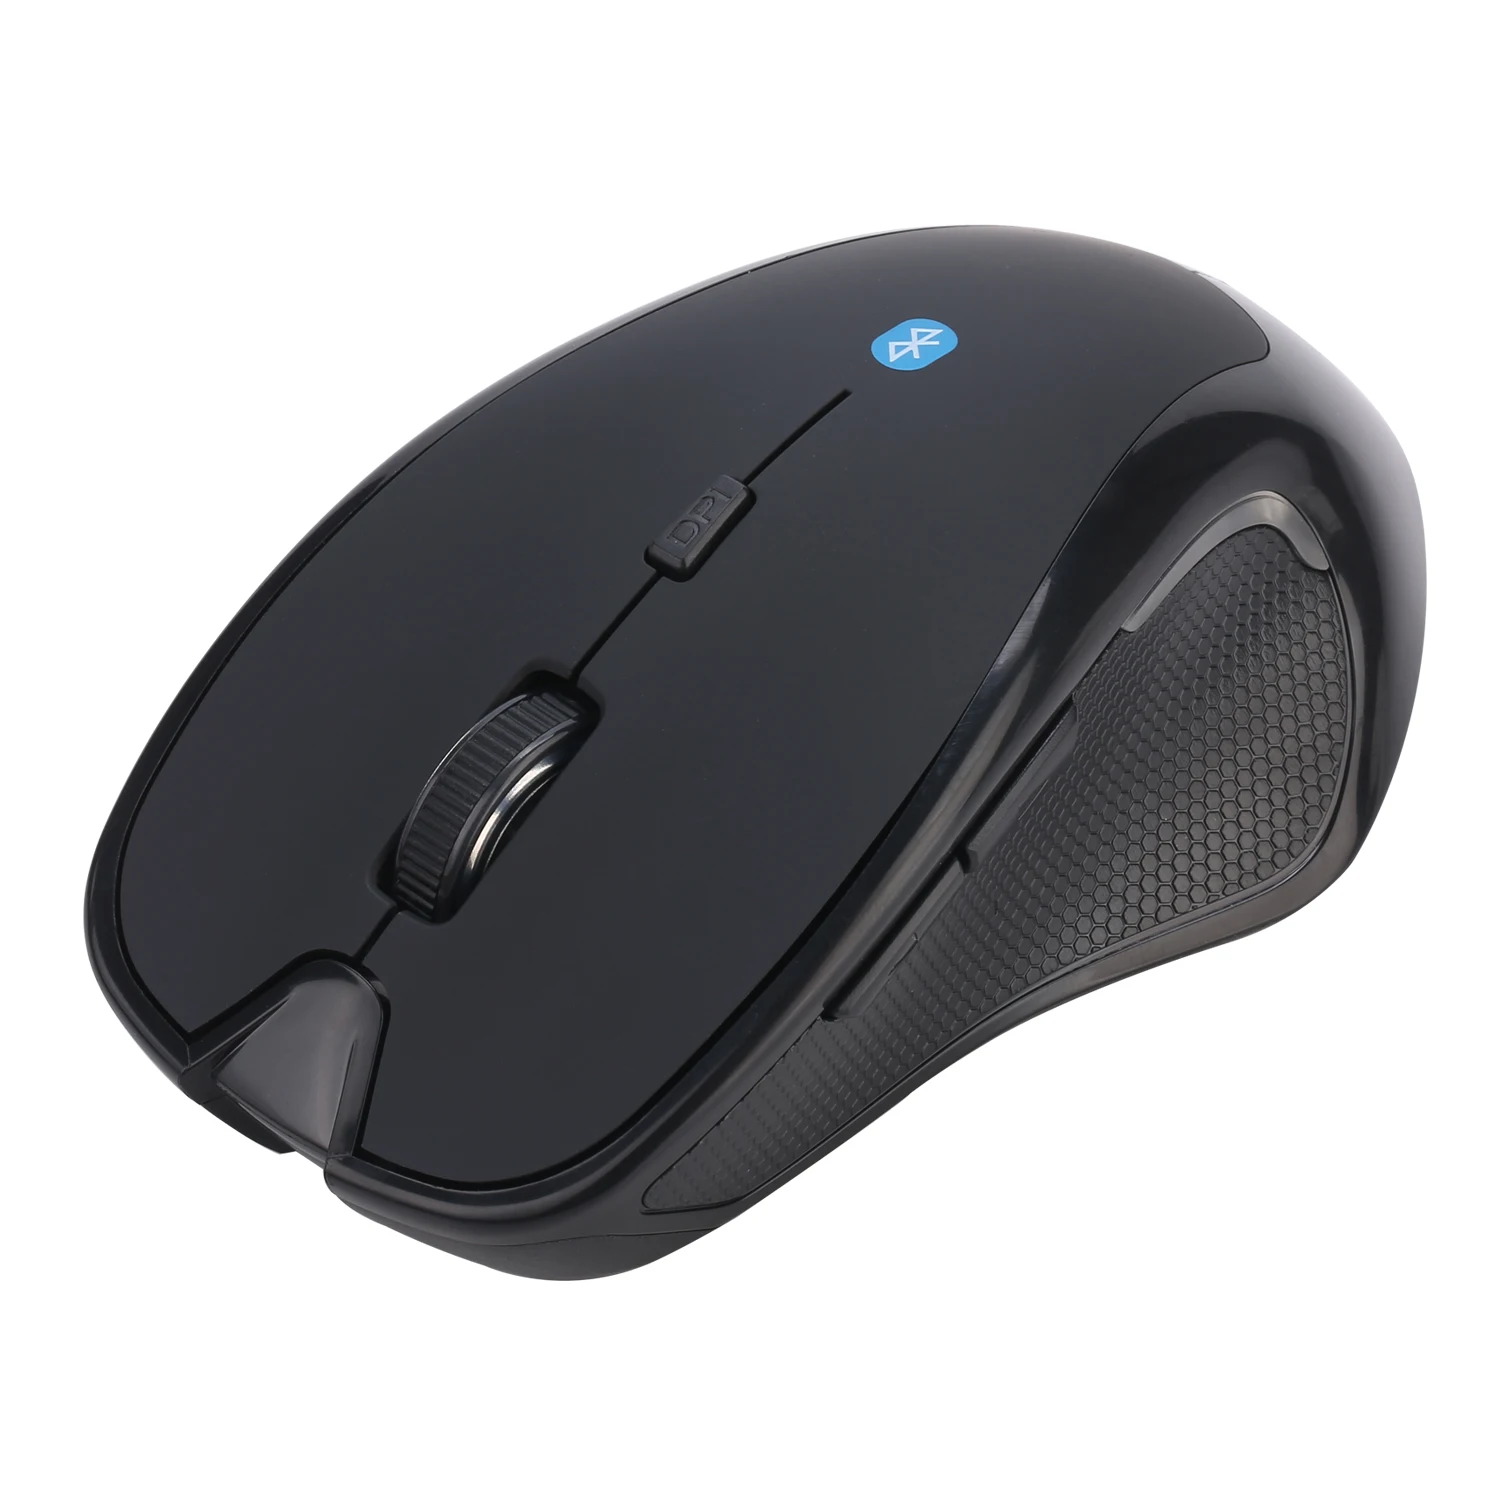 

RML2 2.4Ghz Wireless Dual Mouse Switchable DPI 1000/1200/1600 ergonomic design for PC Laptop